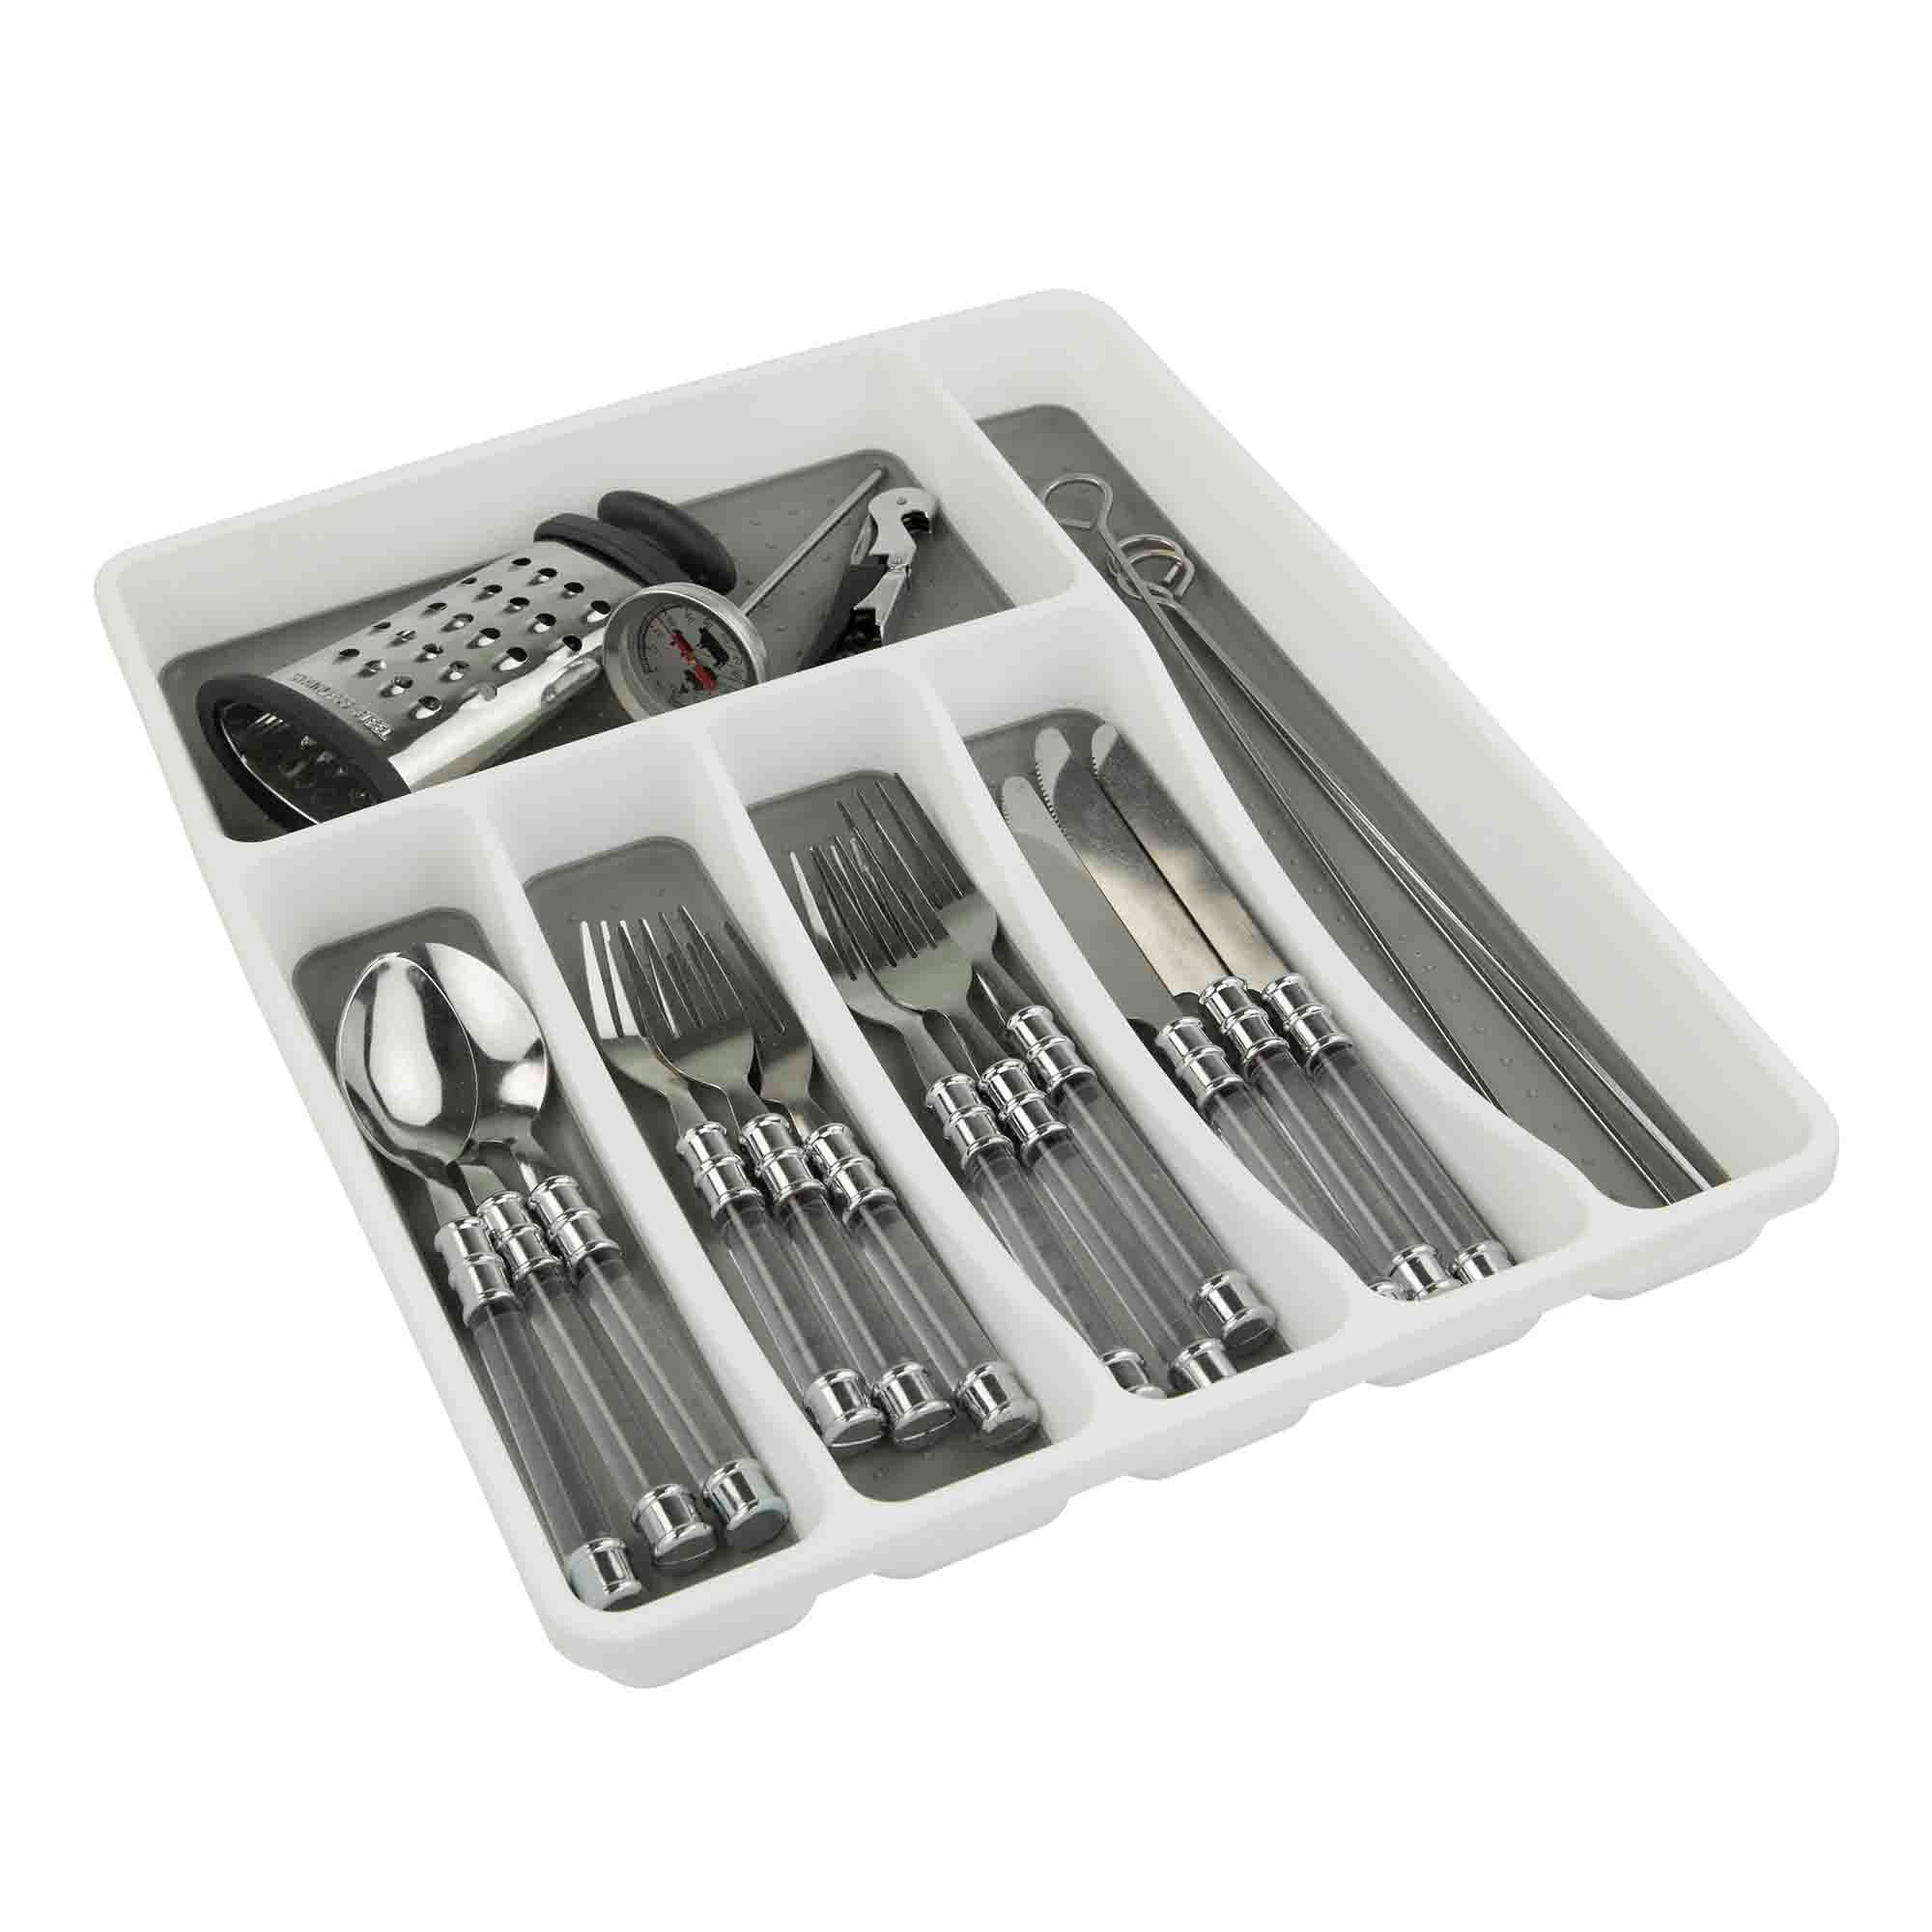 Home Basics Large Cutlery Tray with Rubber Lined Compartments, White $6.50 EACH, CASE PACK OF 12